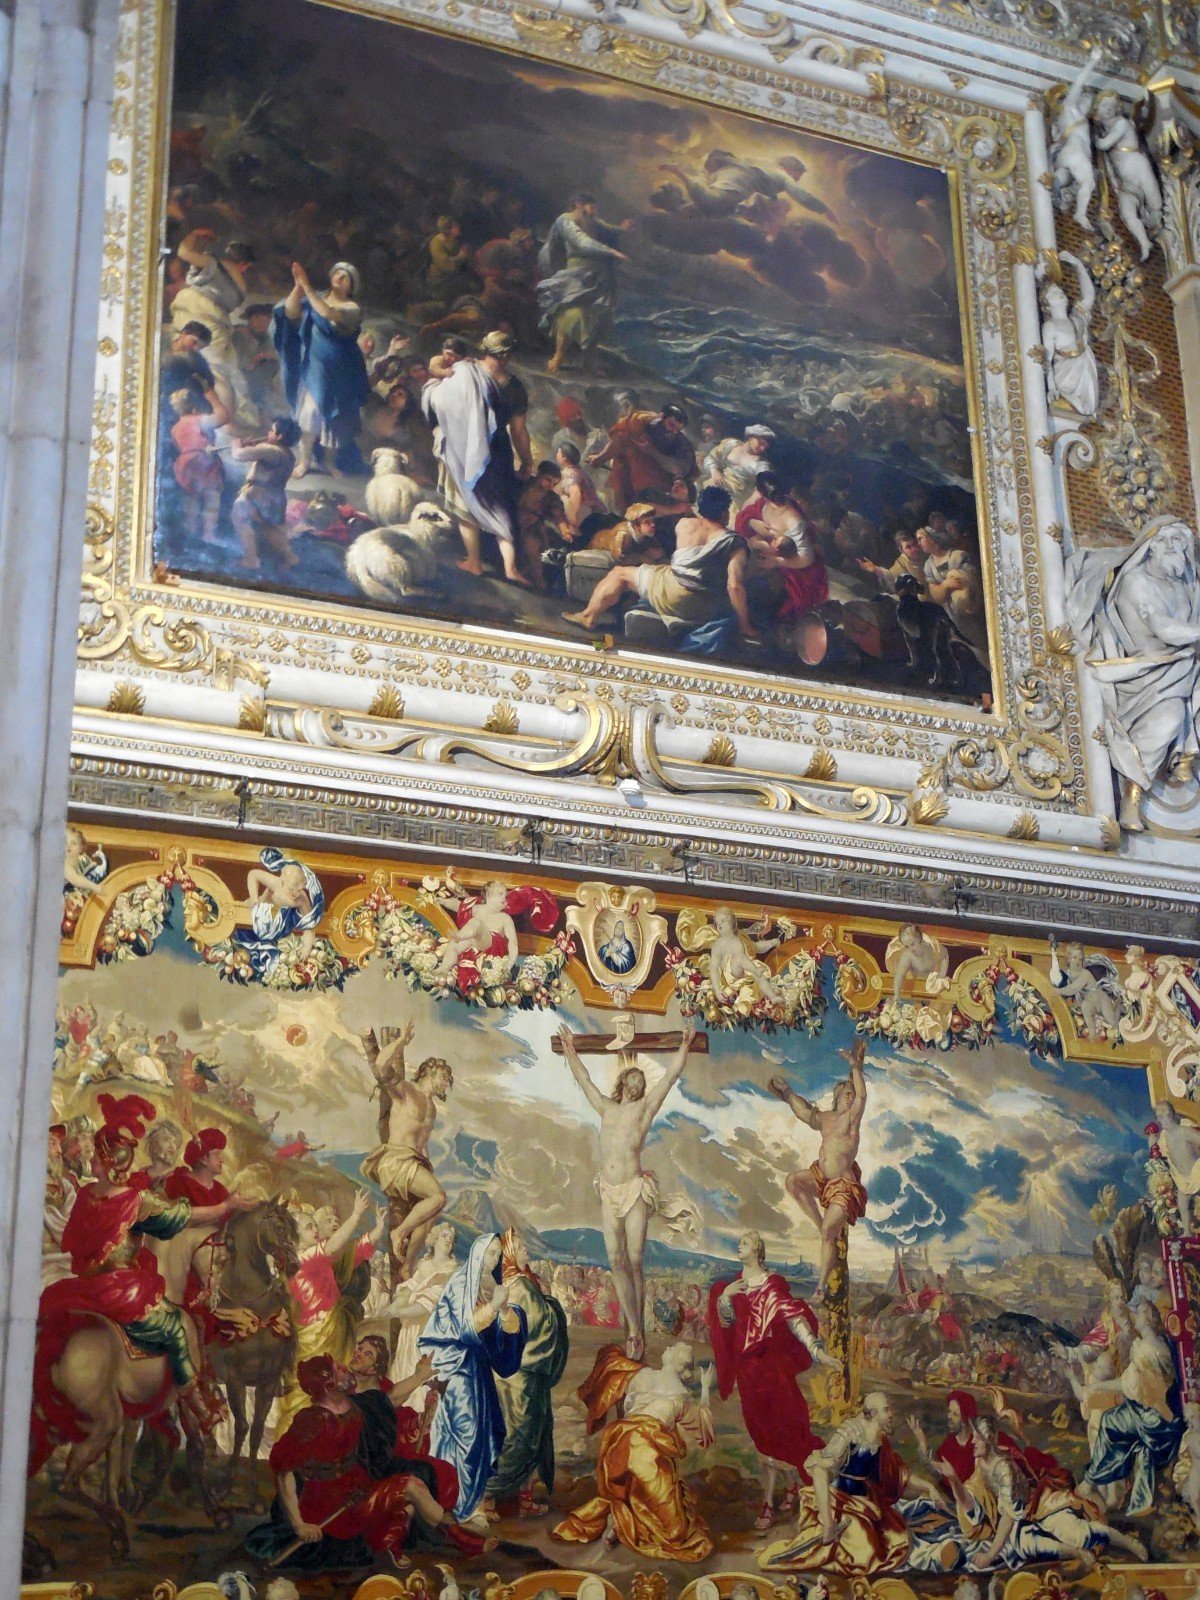 Bergamo, Basilica di Santa Maria Maggiore, tapestry with "Crucifixion", performed in 1698 on a design by Ludwing van Schoor, and above it there is a painting by Luca Giordano with the “Passage of the Red Sea” made in 1681